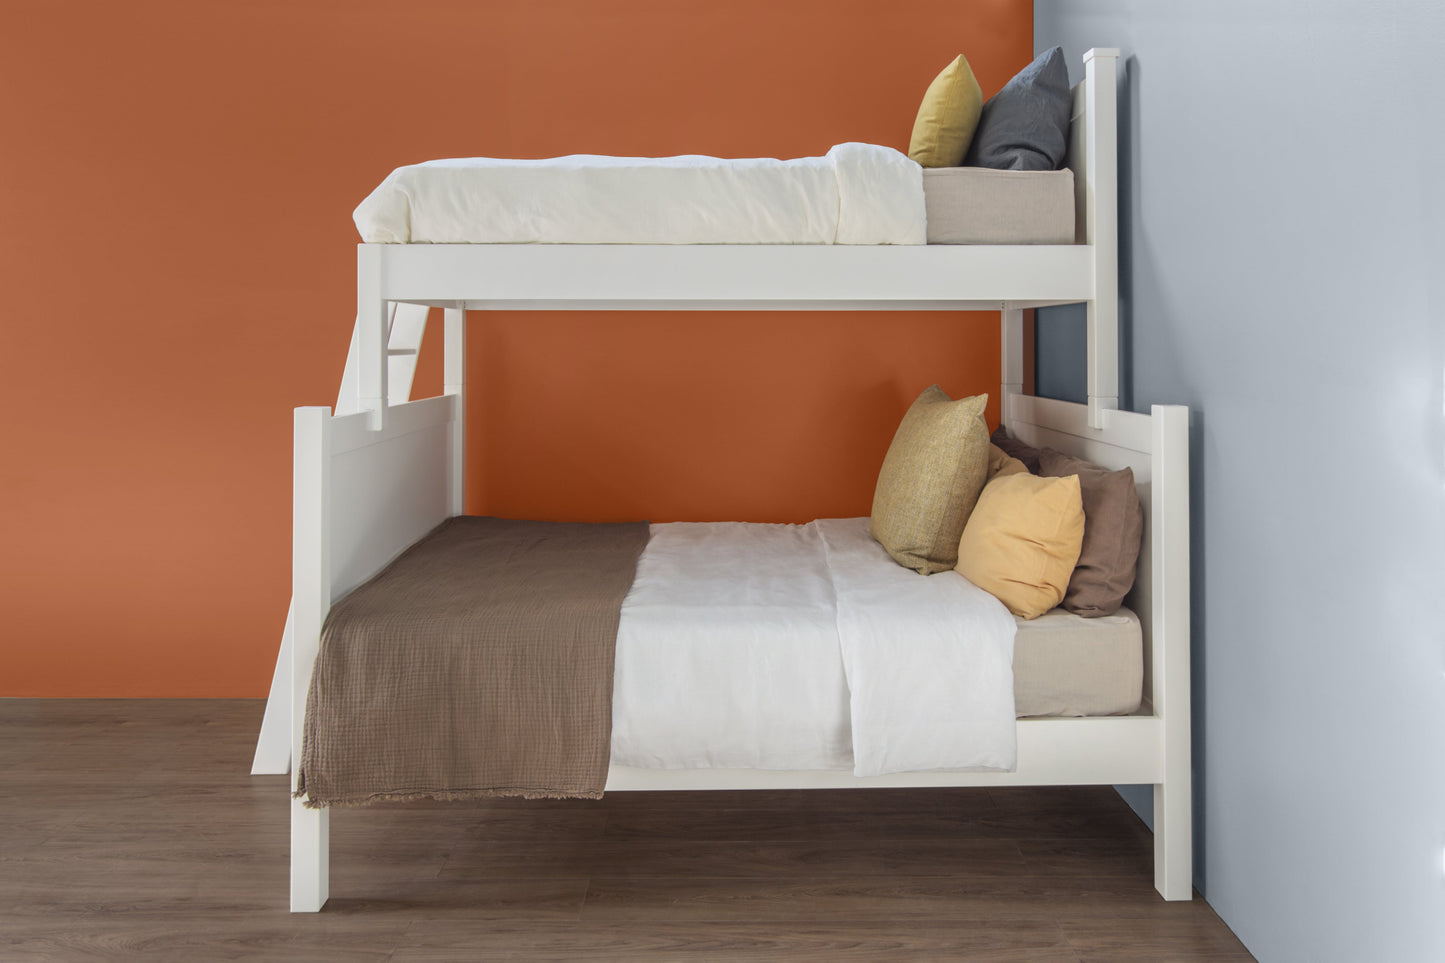 Lynx 1 double bunk bed - The Room